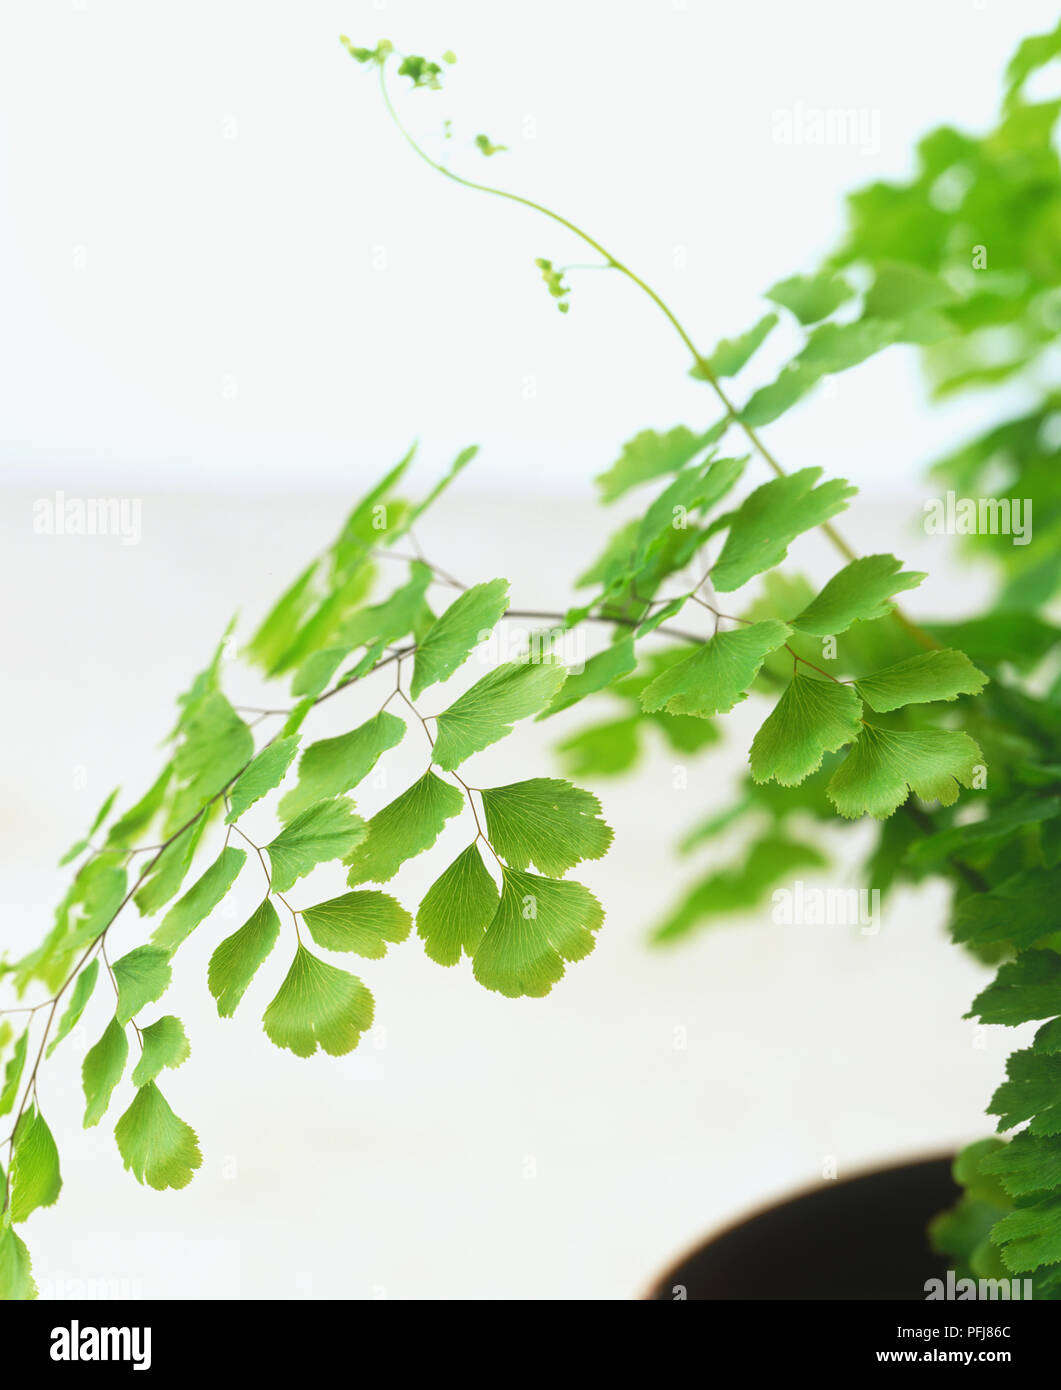 Adiantum capillus-veneris, Maidenhair Fern, arching fronds divided into fan-shaped green leaflets (pinnae) contrasting with fine black stems, close-up. Stock Photo